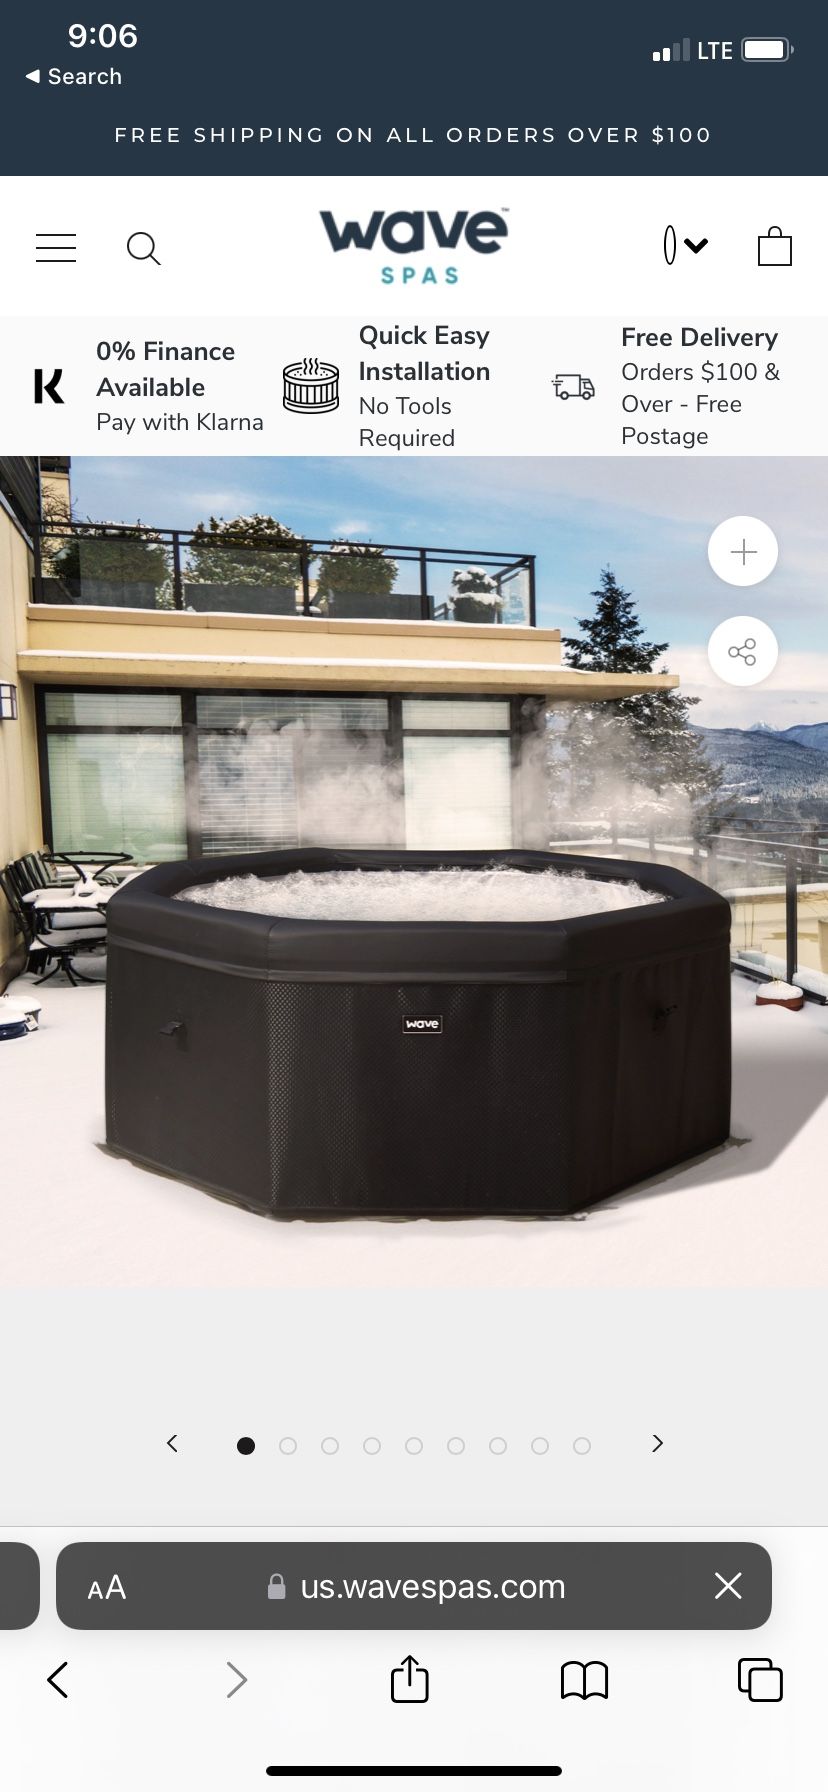 Wave Collapsible Hot Tub - Works Well, Just Needs A New Liner 